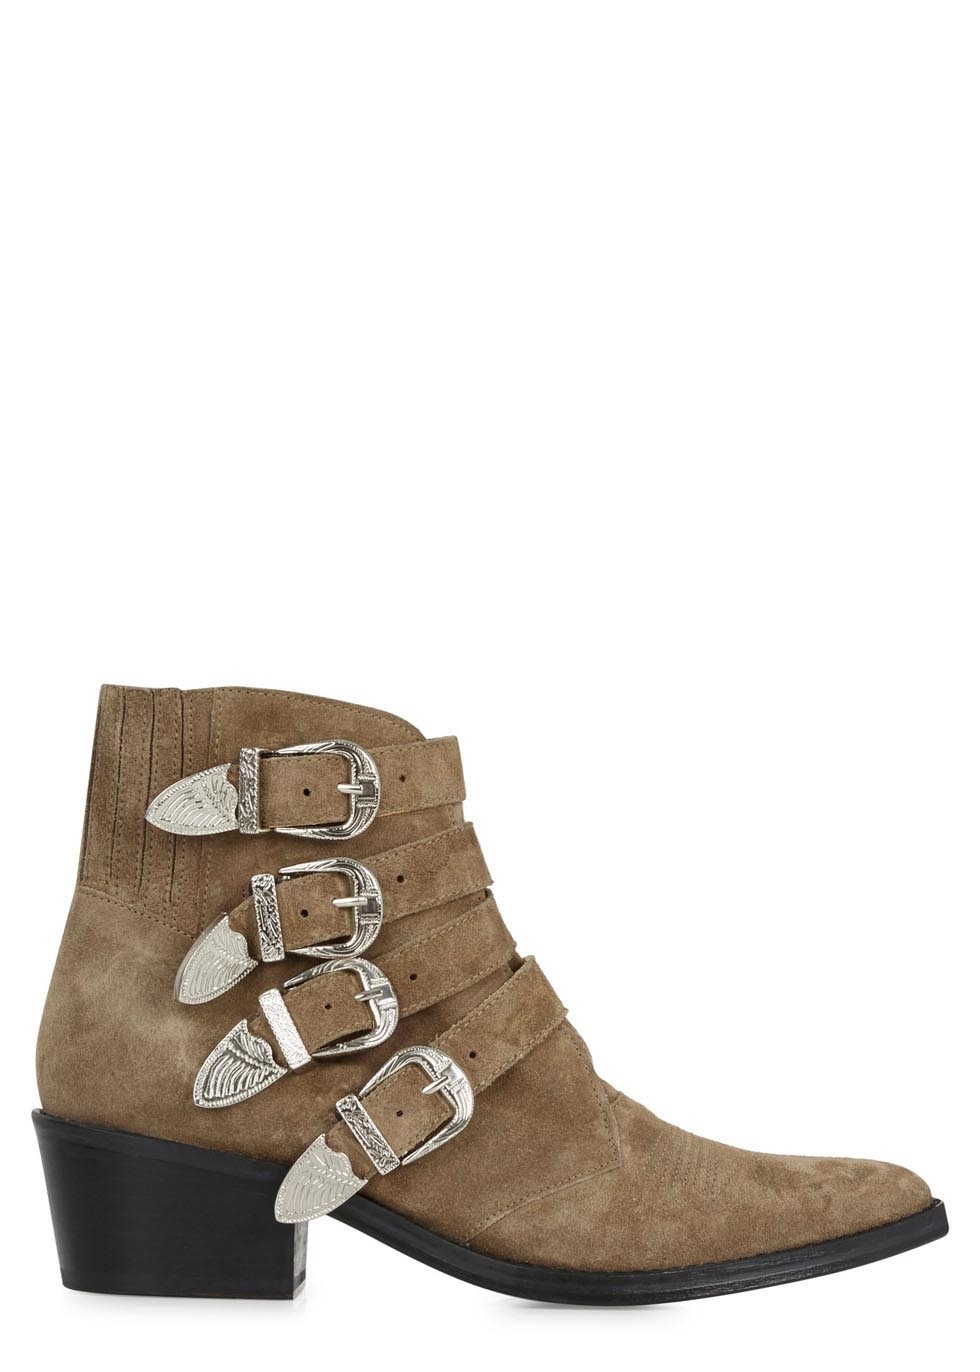 Brown buckle embellished ankle boots